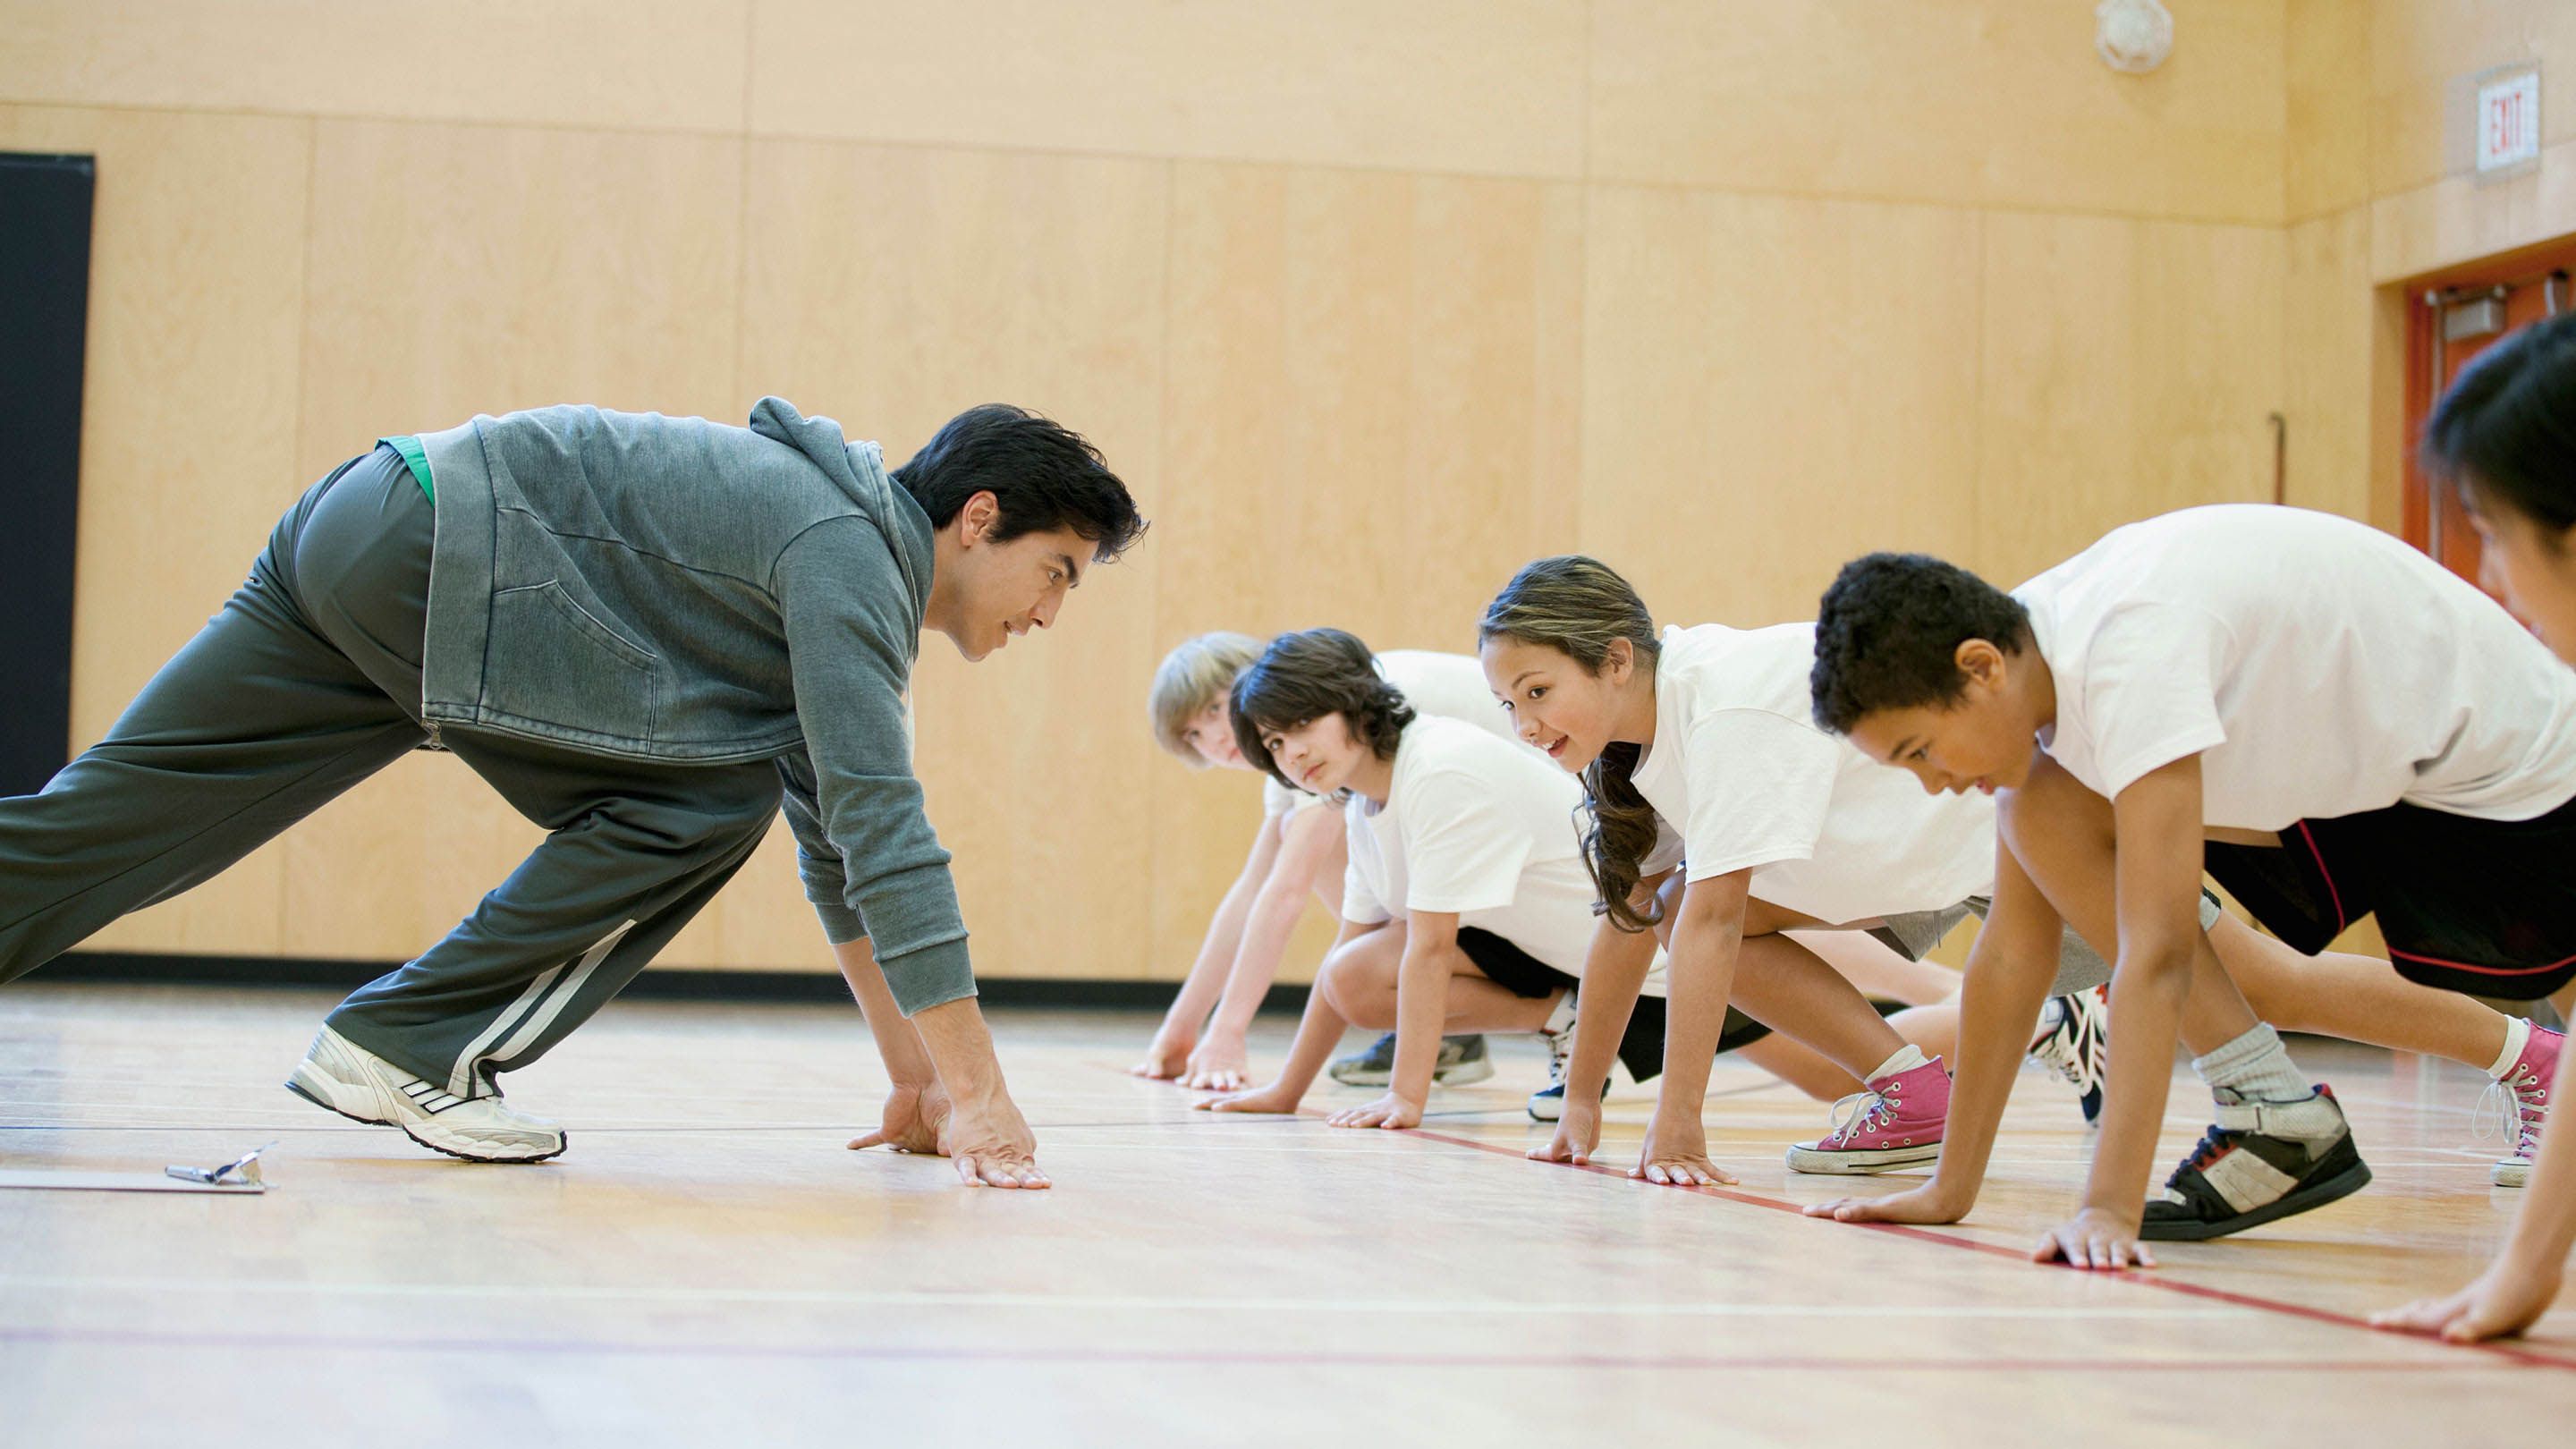 physical education activities in the classroom